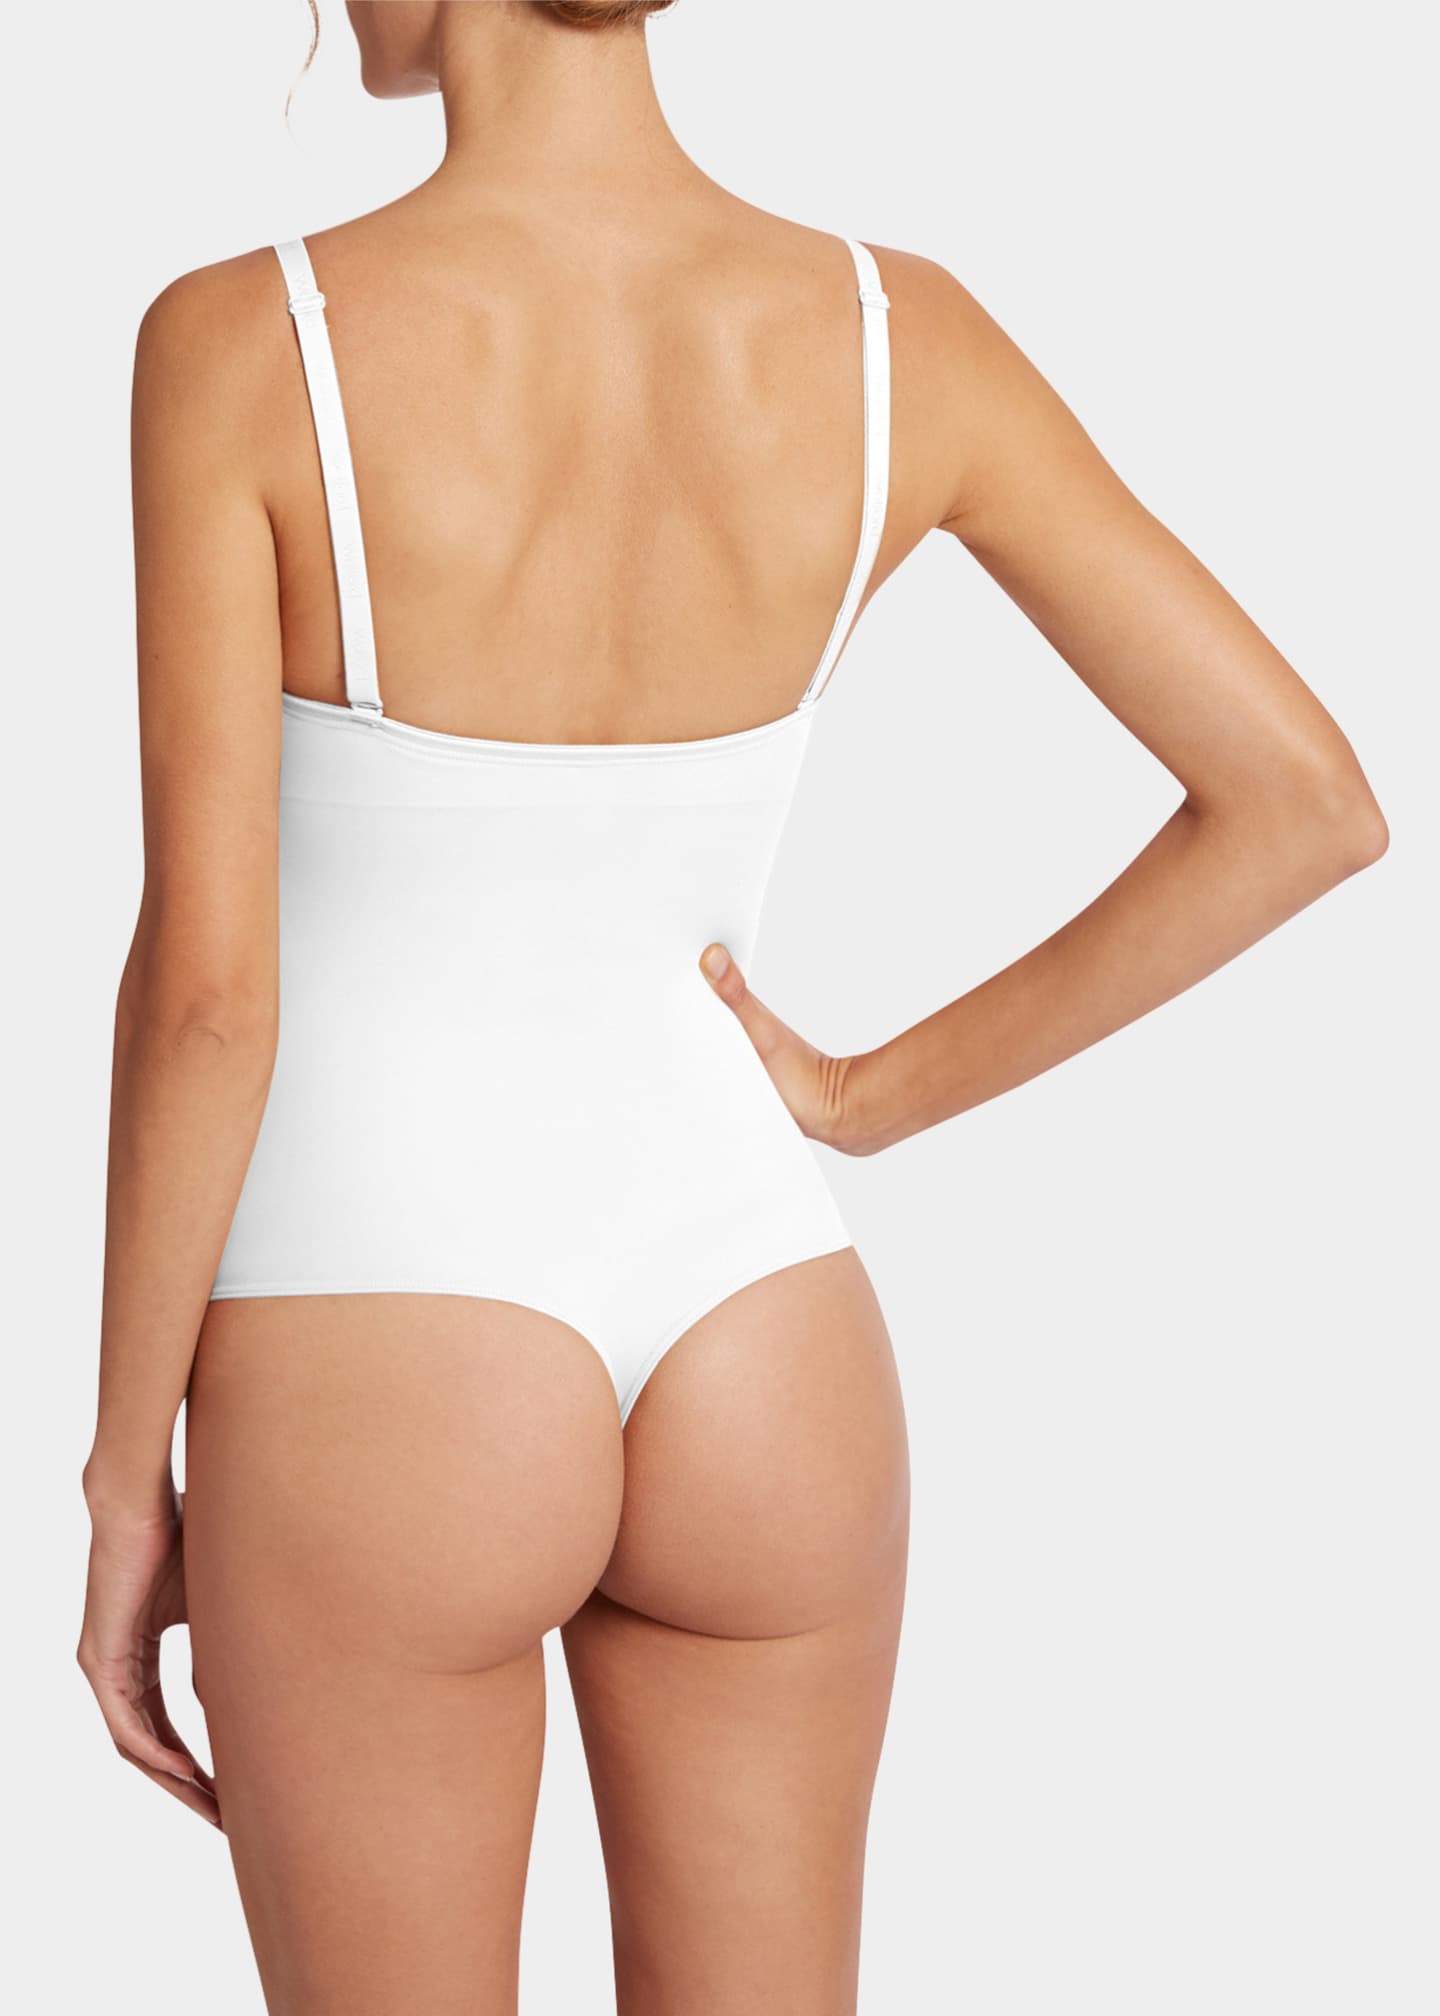 Wolford Teal Thong Bodysuit xs / Small -  Canada